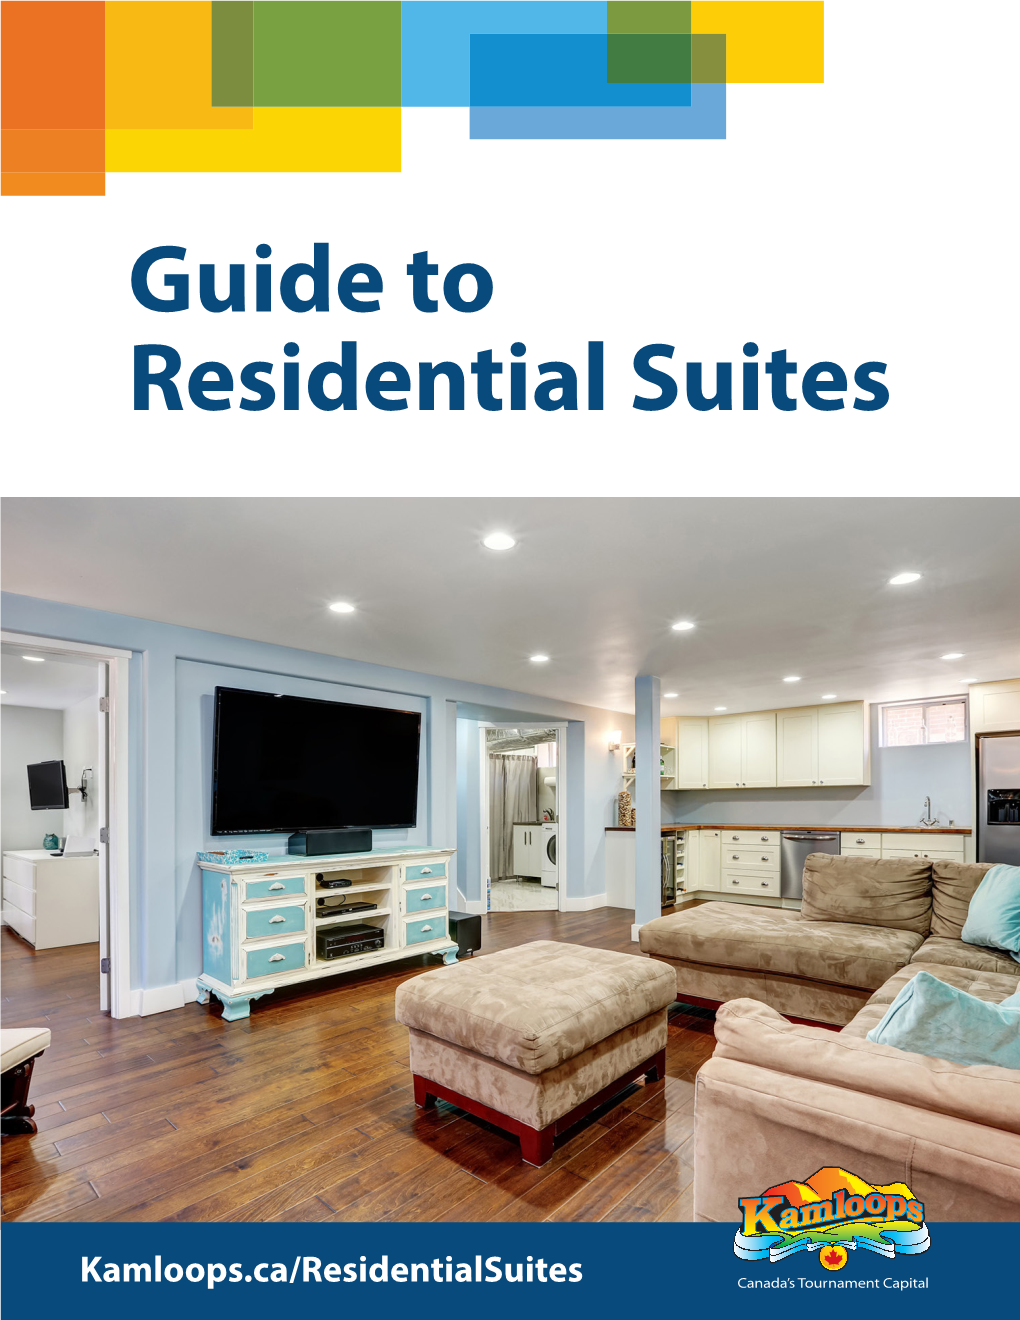 Guide to Residential Suites